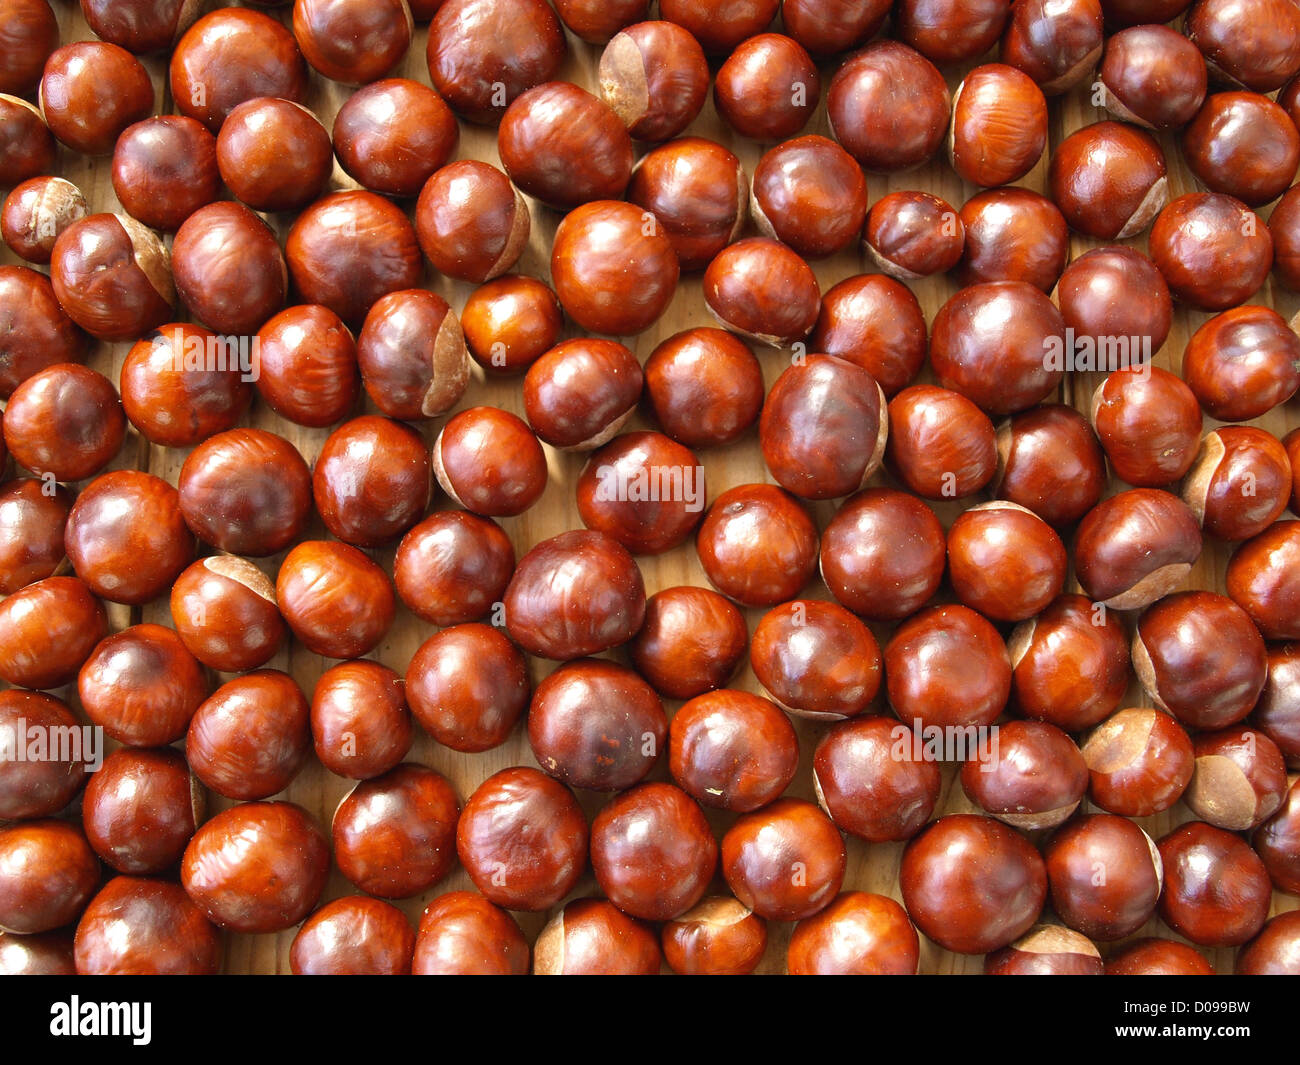 conkers, horse-chestnuts / Kastanien Stock Photo